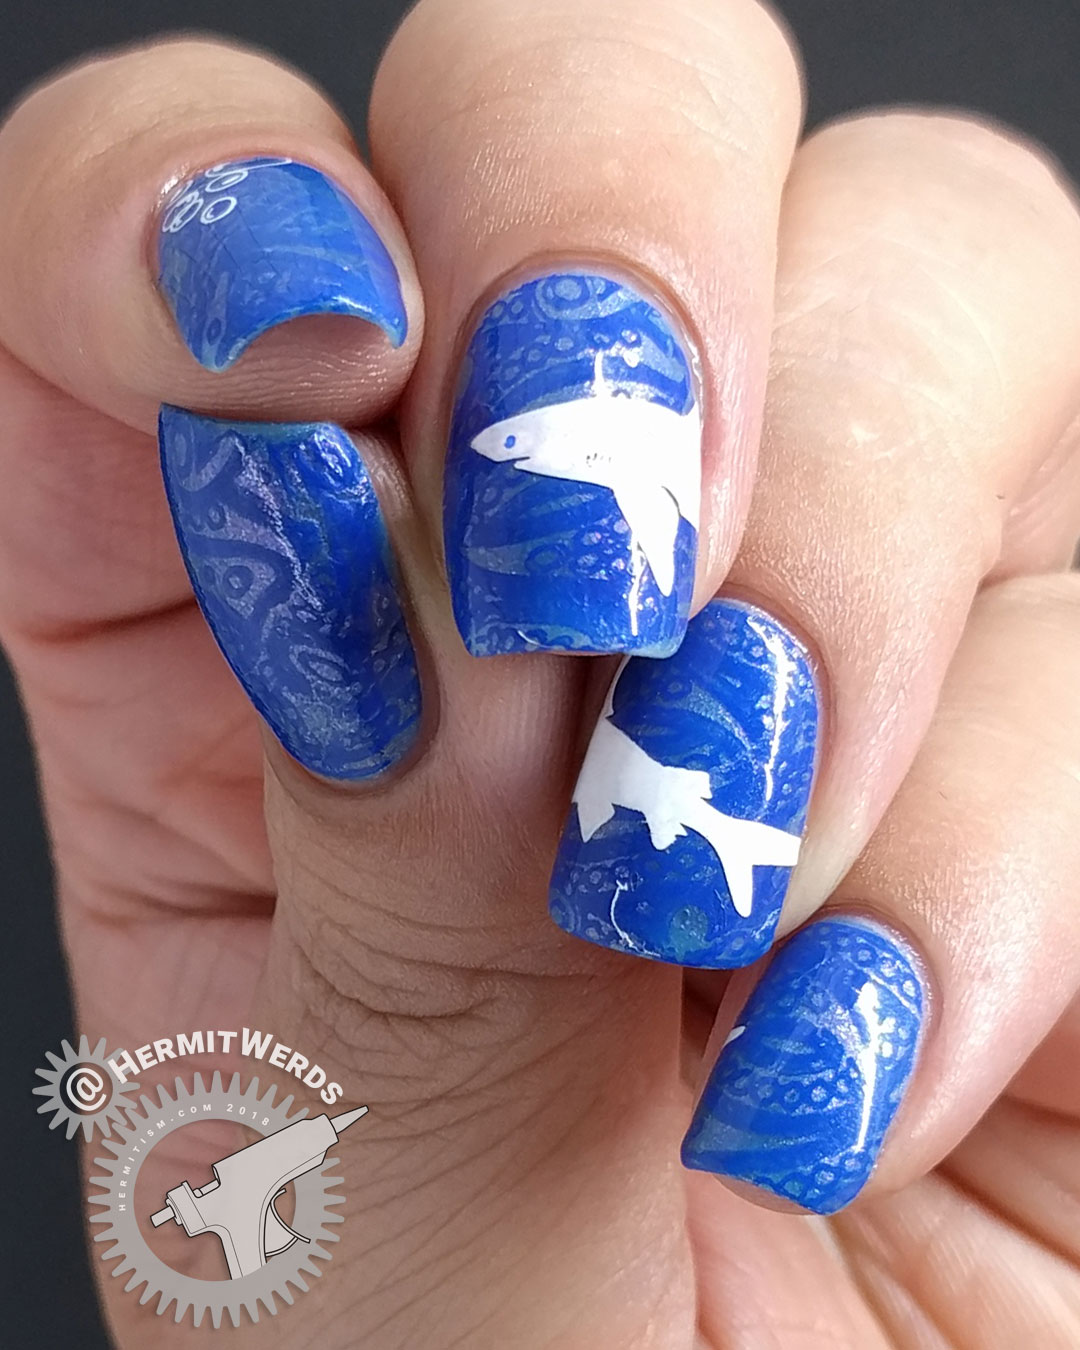 La-sea with a Chance of Sharks - Hermit Werds - nail art with elegant blue lace ocean with a great white shark stamped on top